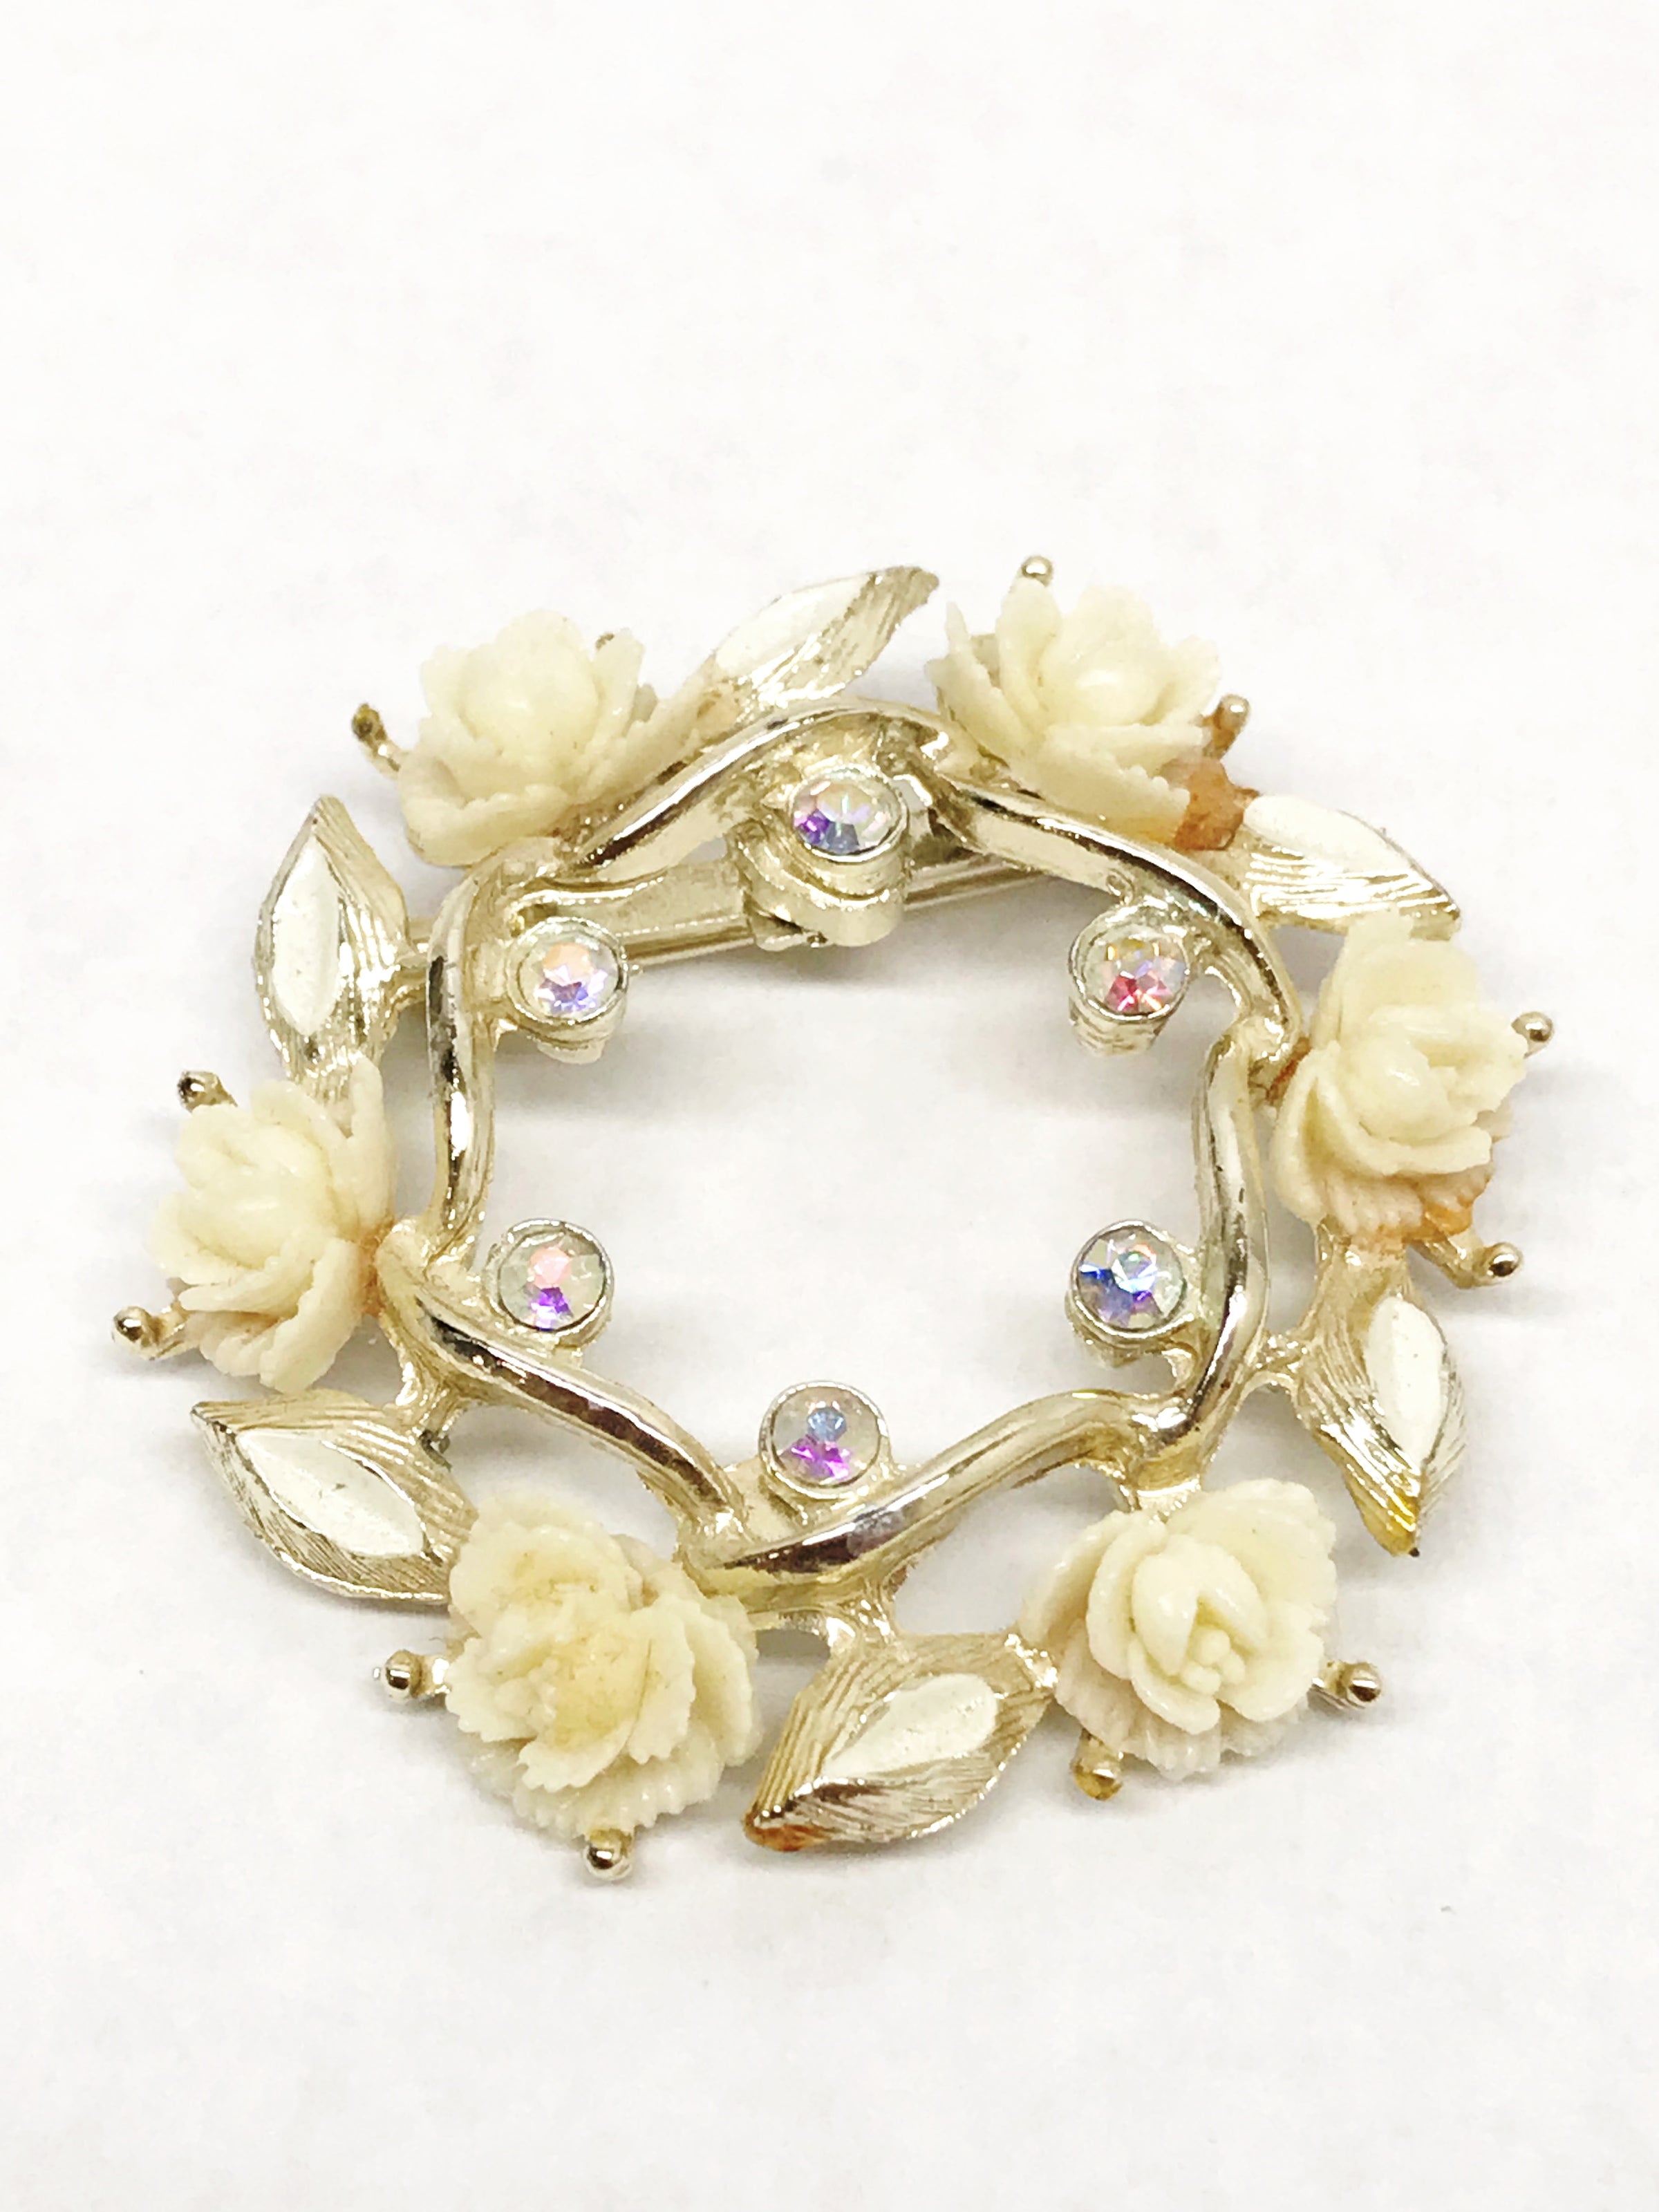 www.hersandhistreasures.com/products/celluloid-roses-and-ab-rhinestone-gold-tone-circle-brooch-pin